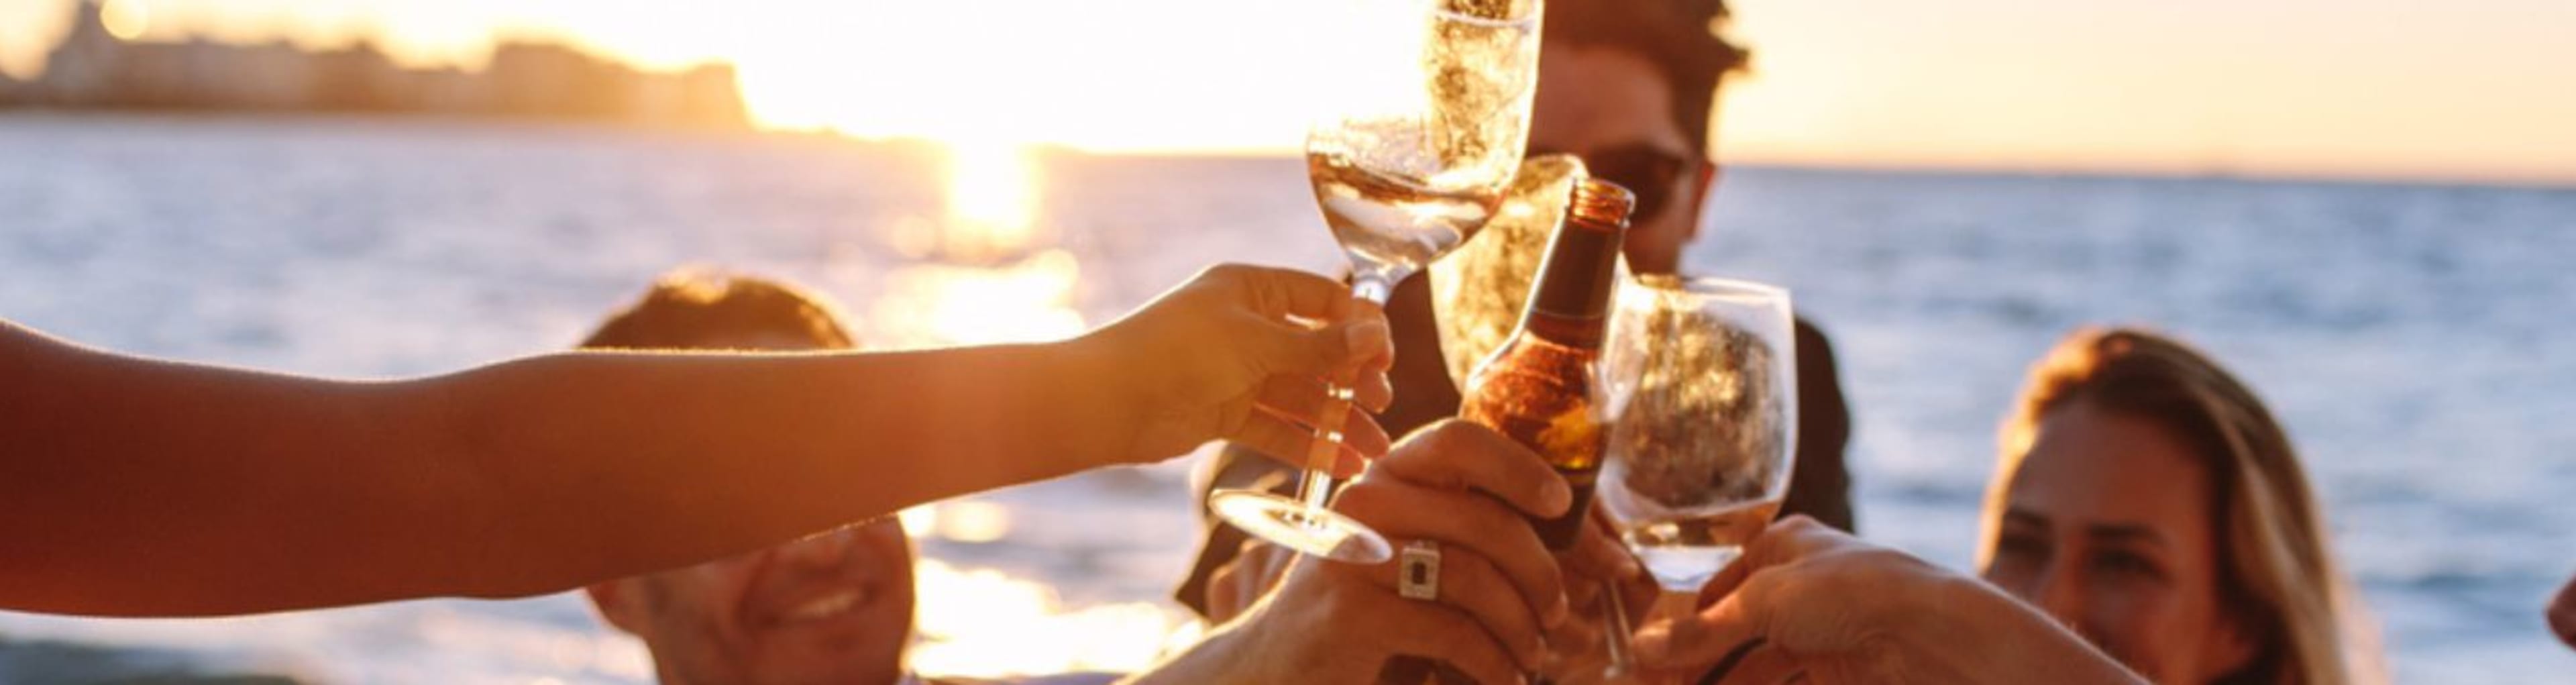 Close up of adult hands raising a toast with wine glasses against sunset sea